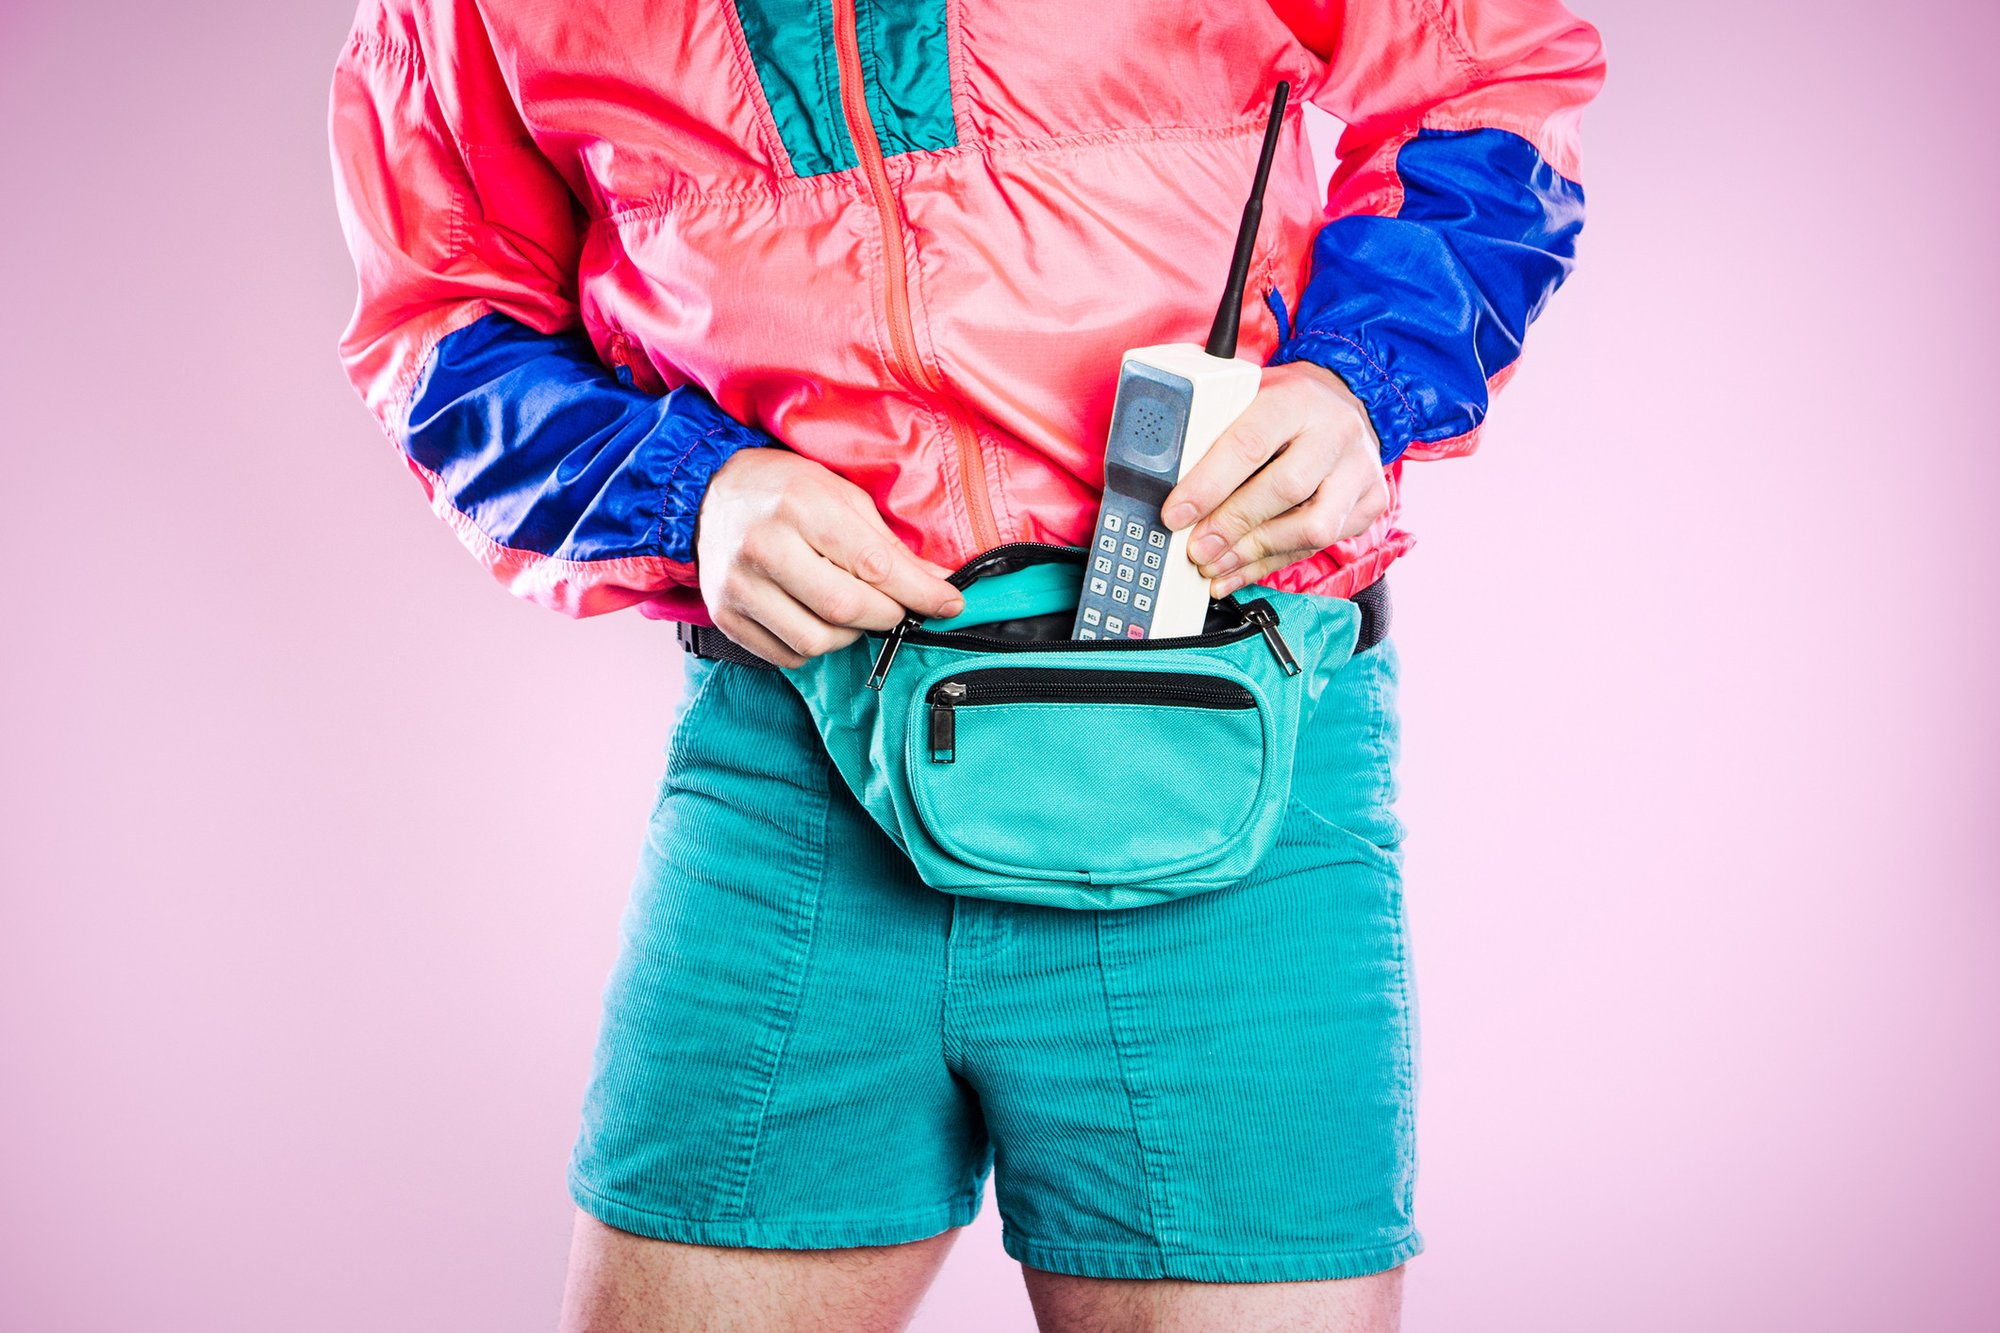 This “Yes or No” Quiz Will Reveal If You Were Born in the ’60s, ’70s, ’80s, Or ’90s 1990s fashion brick phone fanny pack